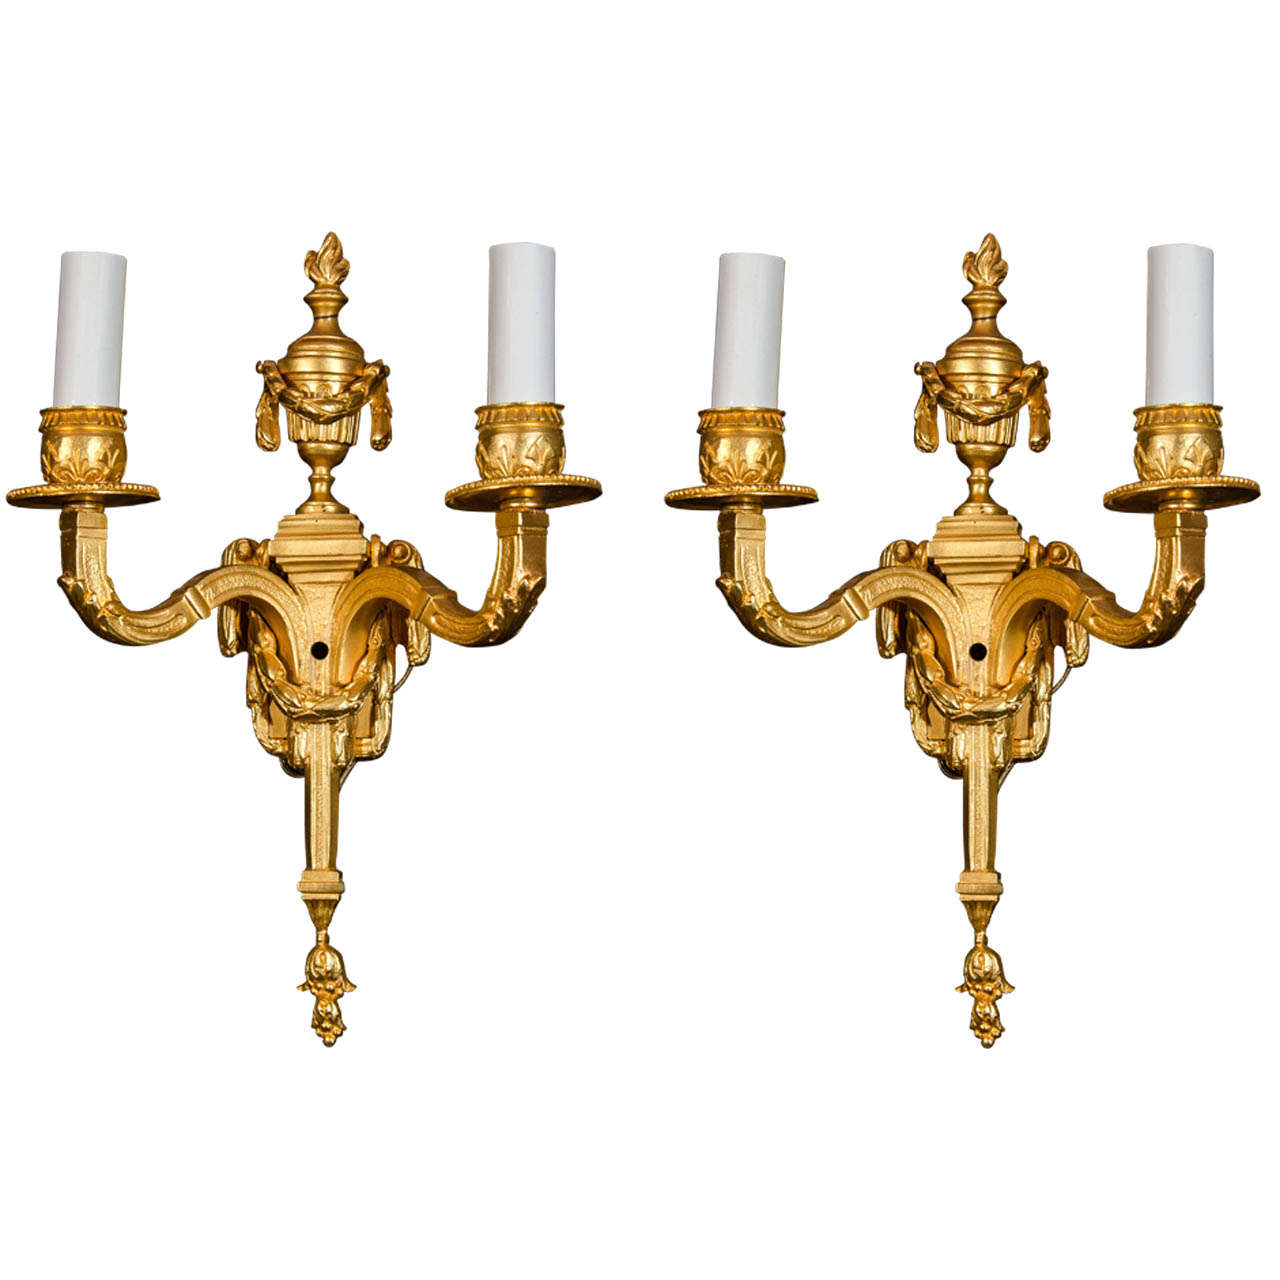 Pair of Antique French Louis XVI Style Two-Light Wall Sconces